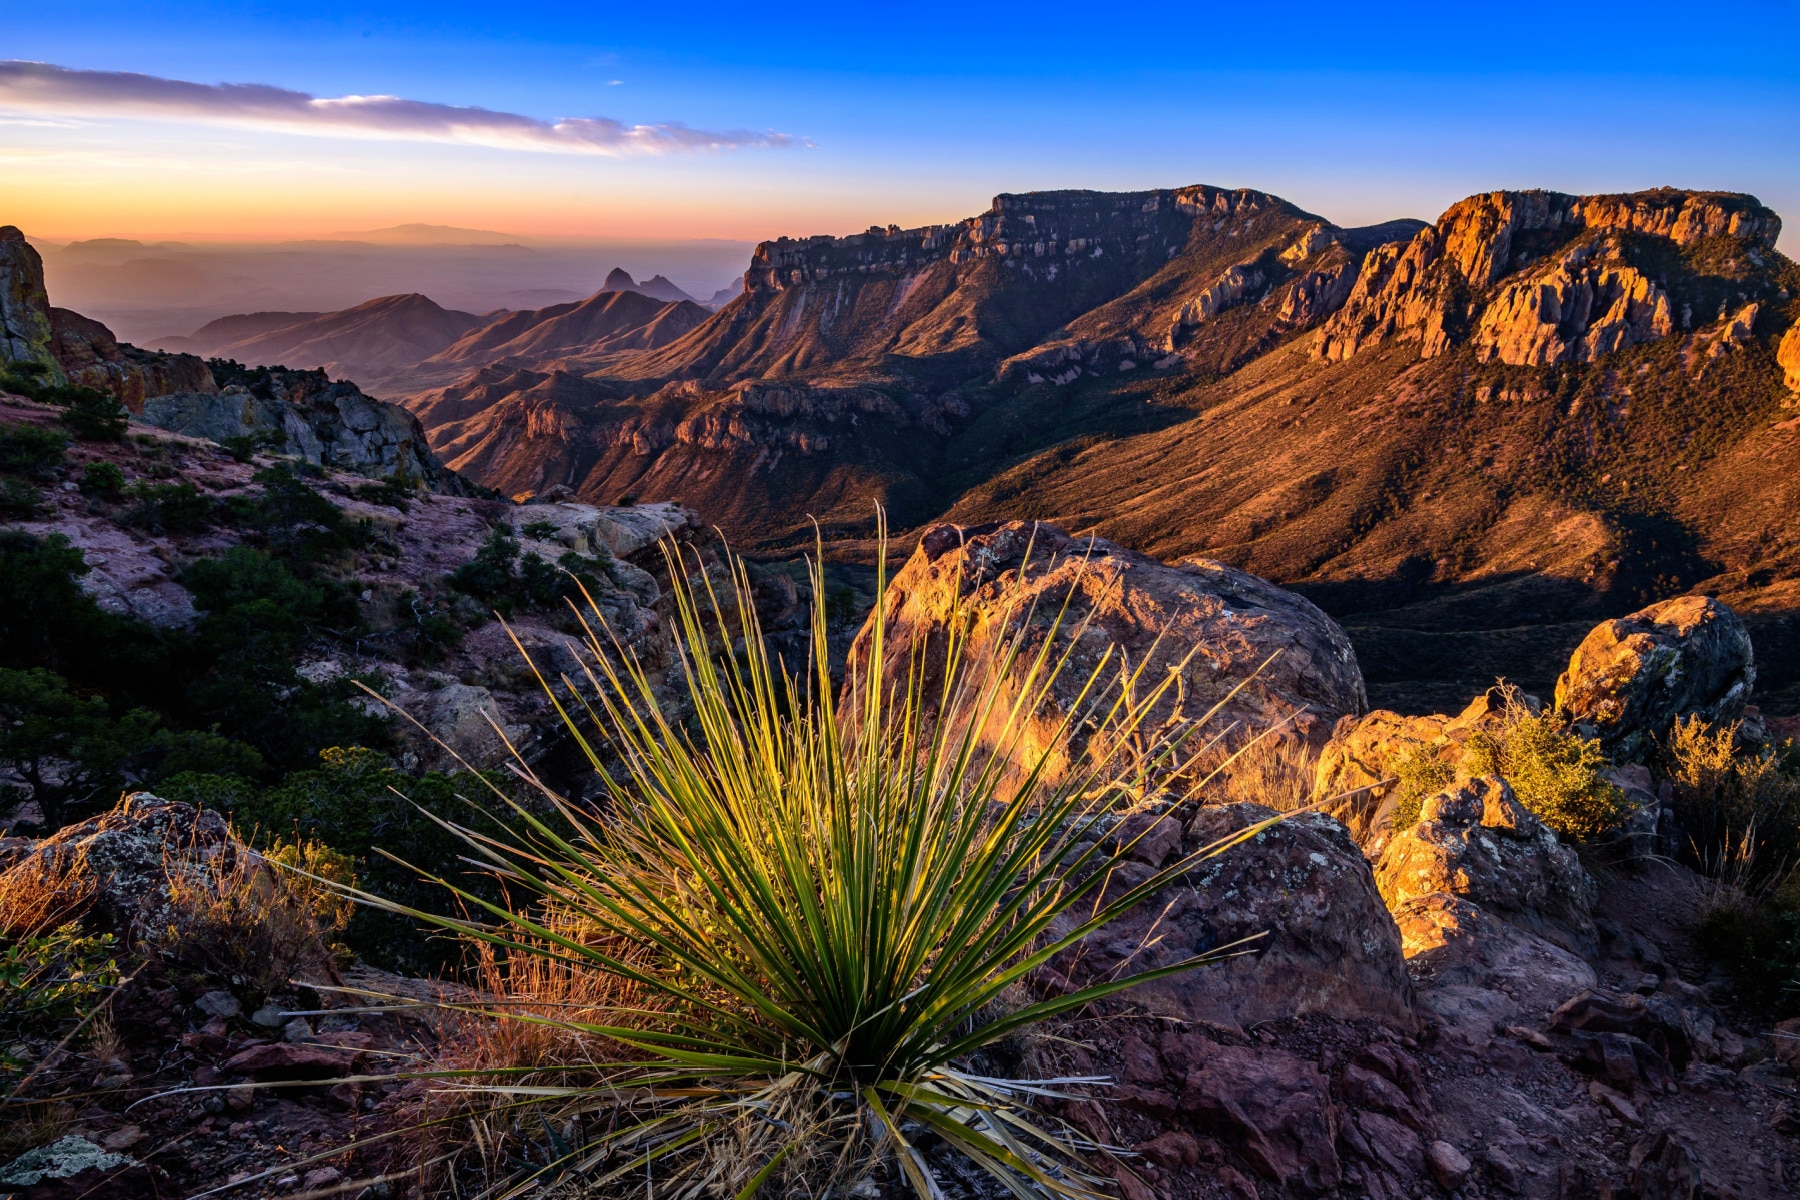 Desert flowers stand out among a sunset view of mountains at Big Bend National Park. It's one of the best national parks to visit in March for the ideal weather and clear skies.